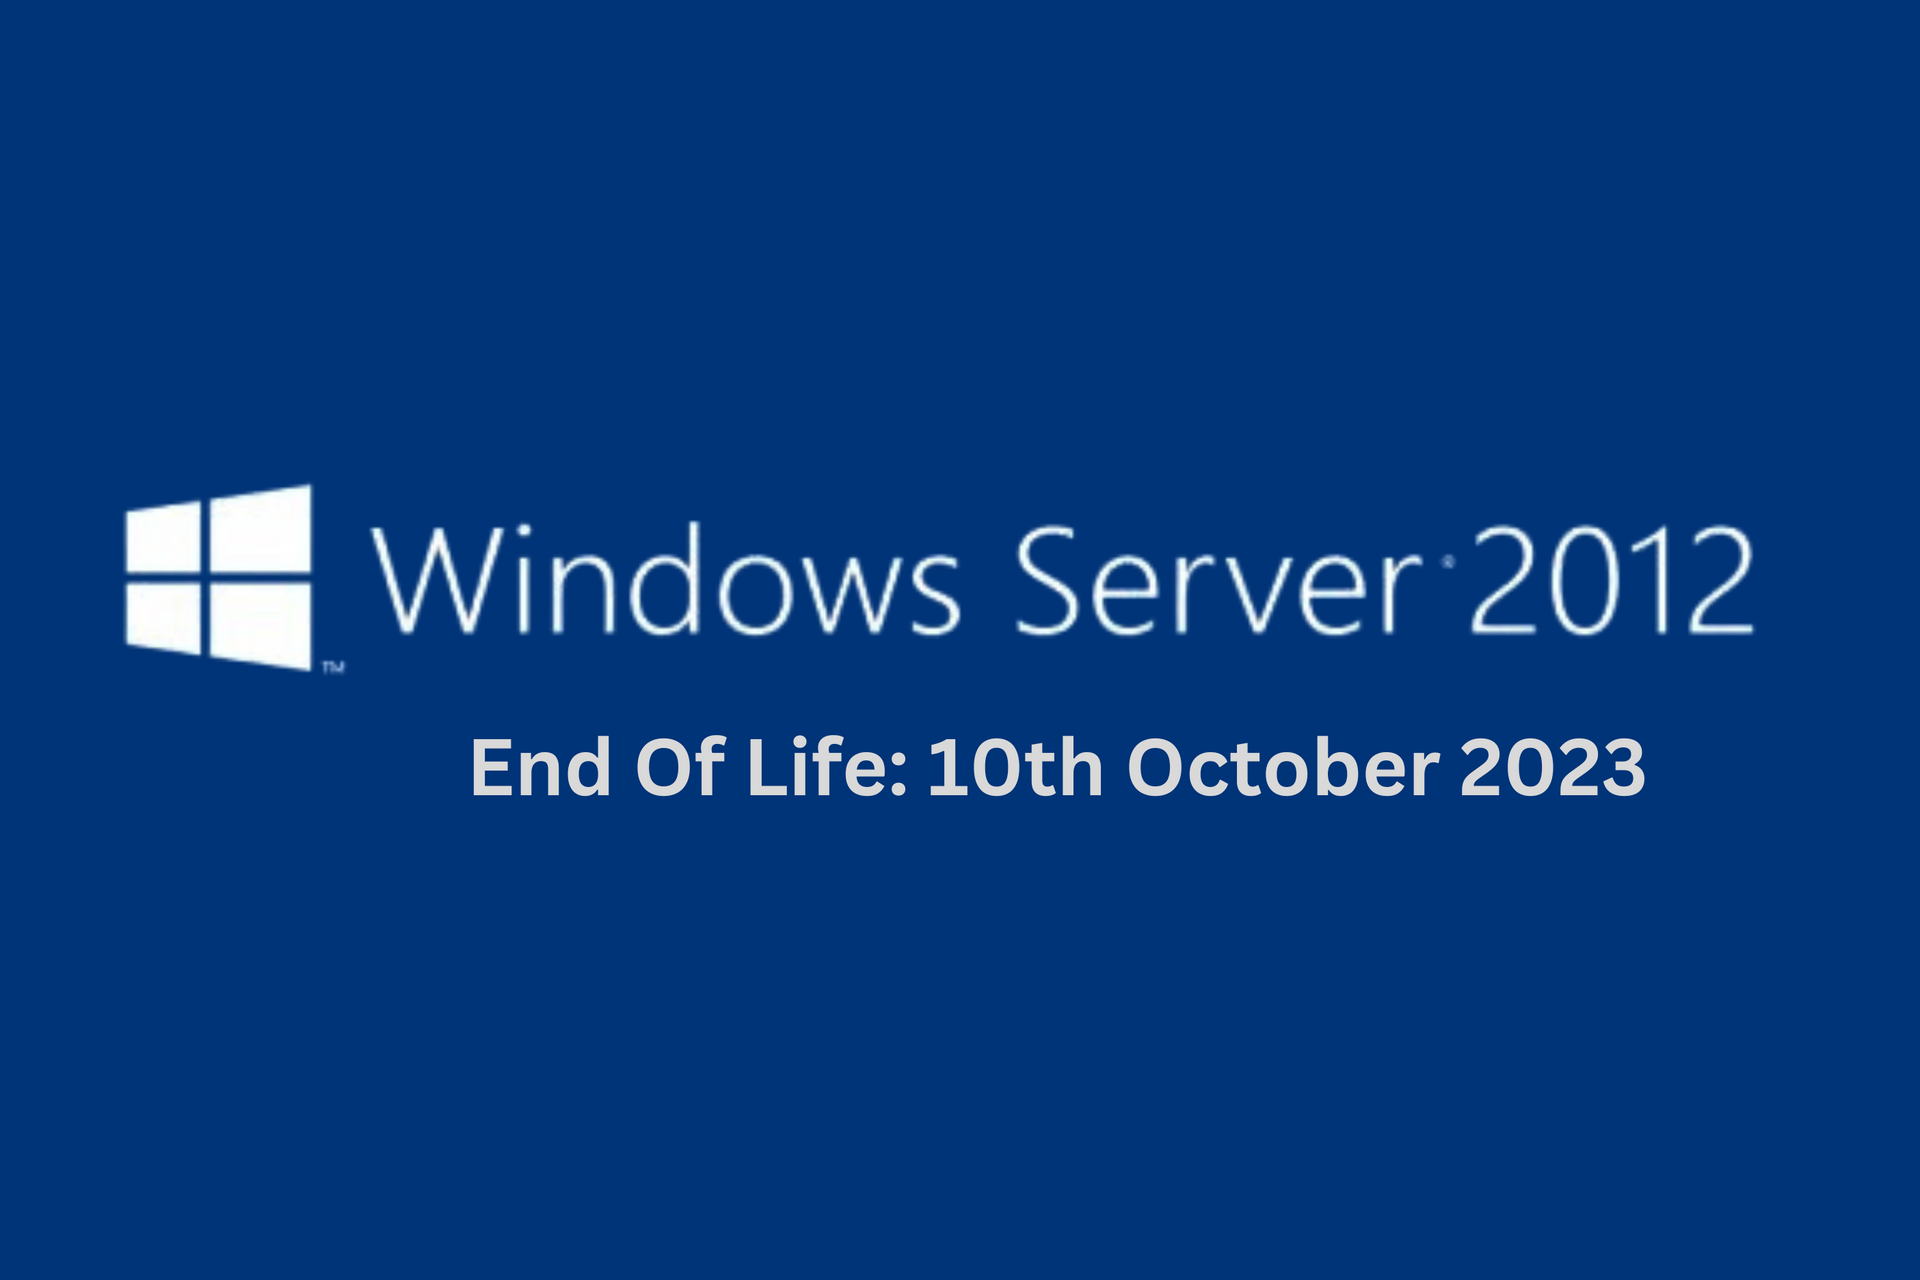 Windows Server 2012 - End Of life: 10th October 2023